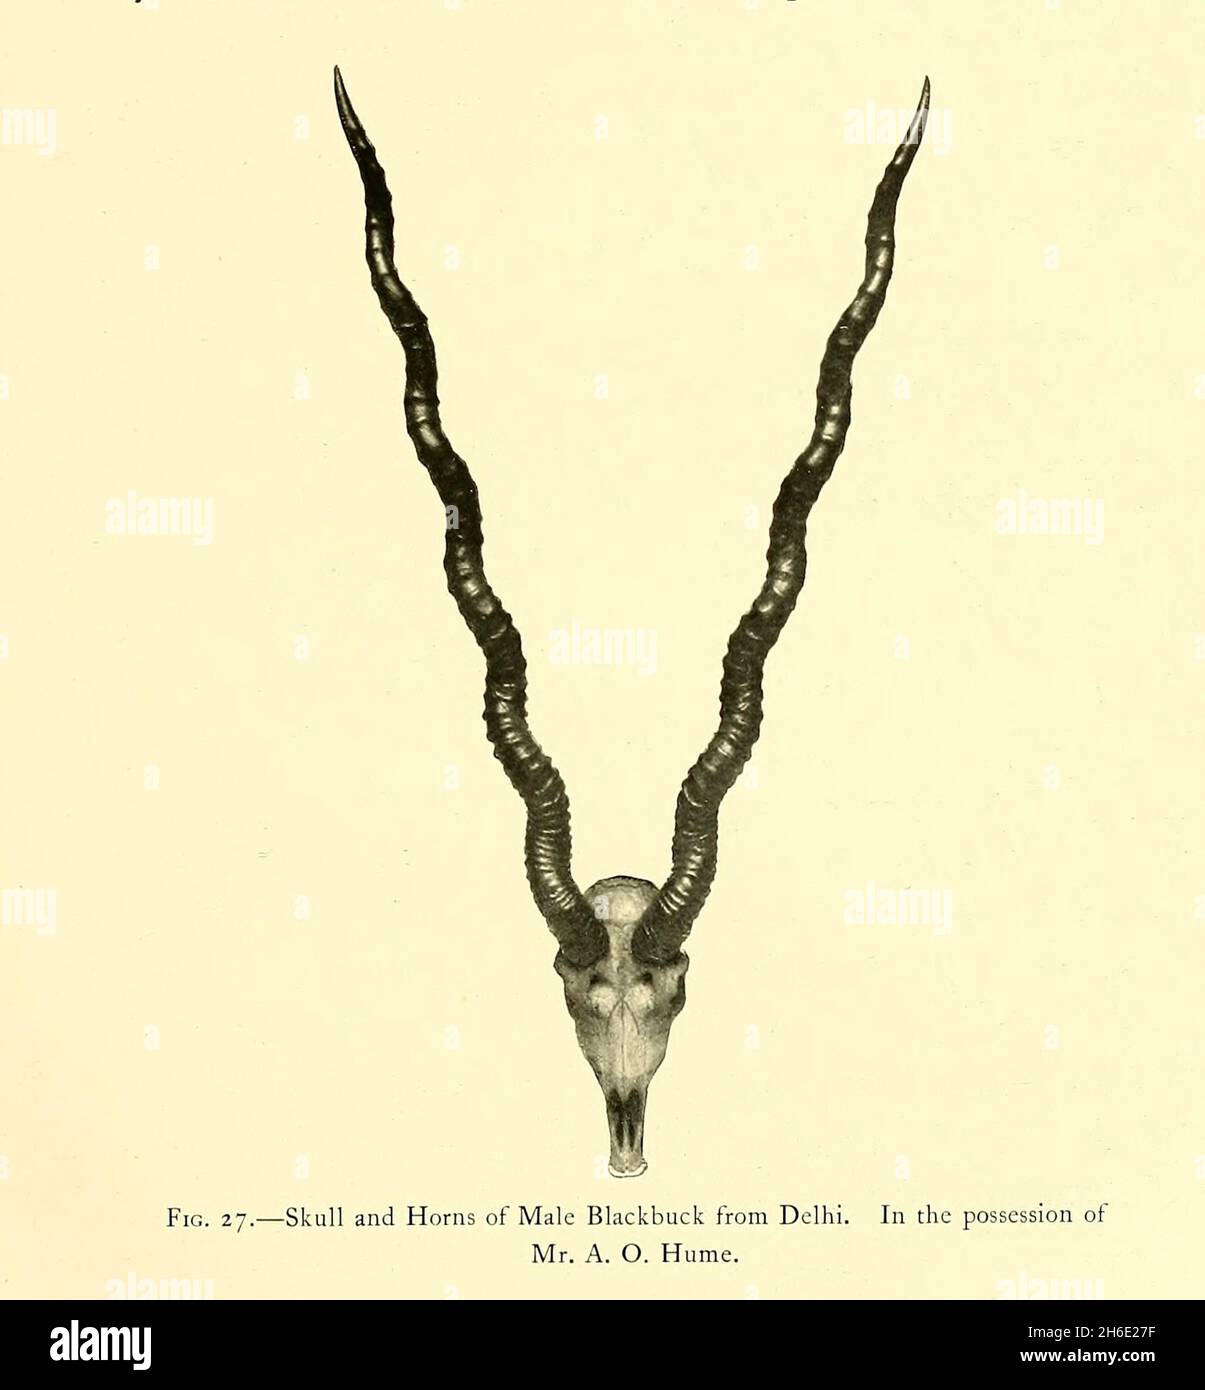 Skull and Horns of Male Blackbuck or Indian antelope (Antilope cervicapra), from Delhi. In the possession of Mr. A. O. Hume. from the book ' The great and small game of India, Burma, & Tibet ' by Richard Lydekker, Published in London by R. Ward in 1900 Stock Photo